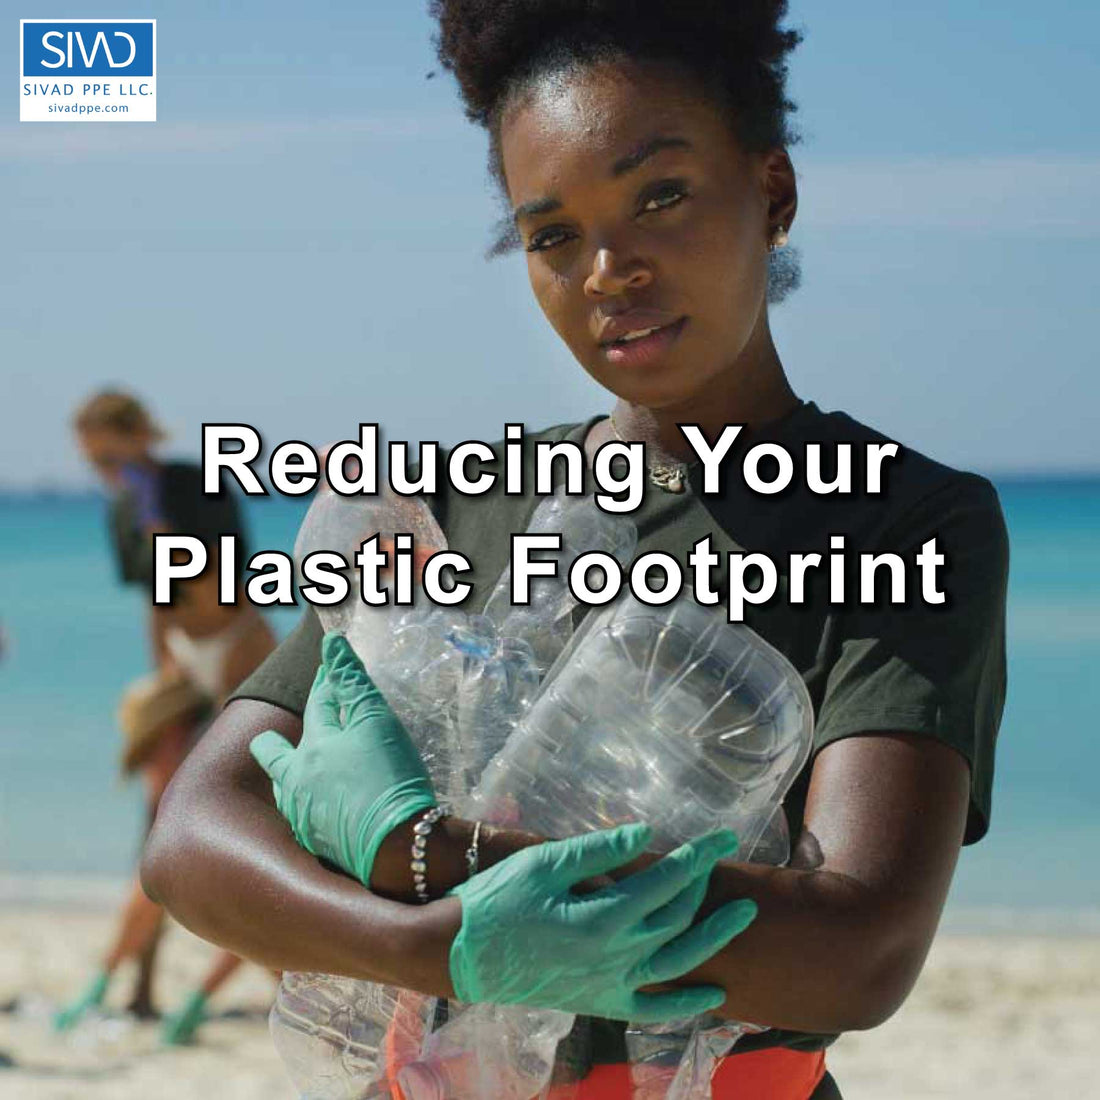 How Are You Reducing Your Plastic Footprint?